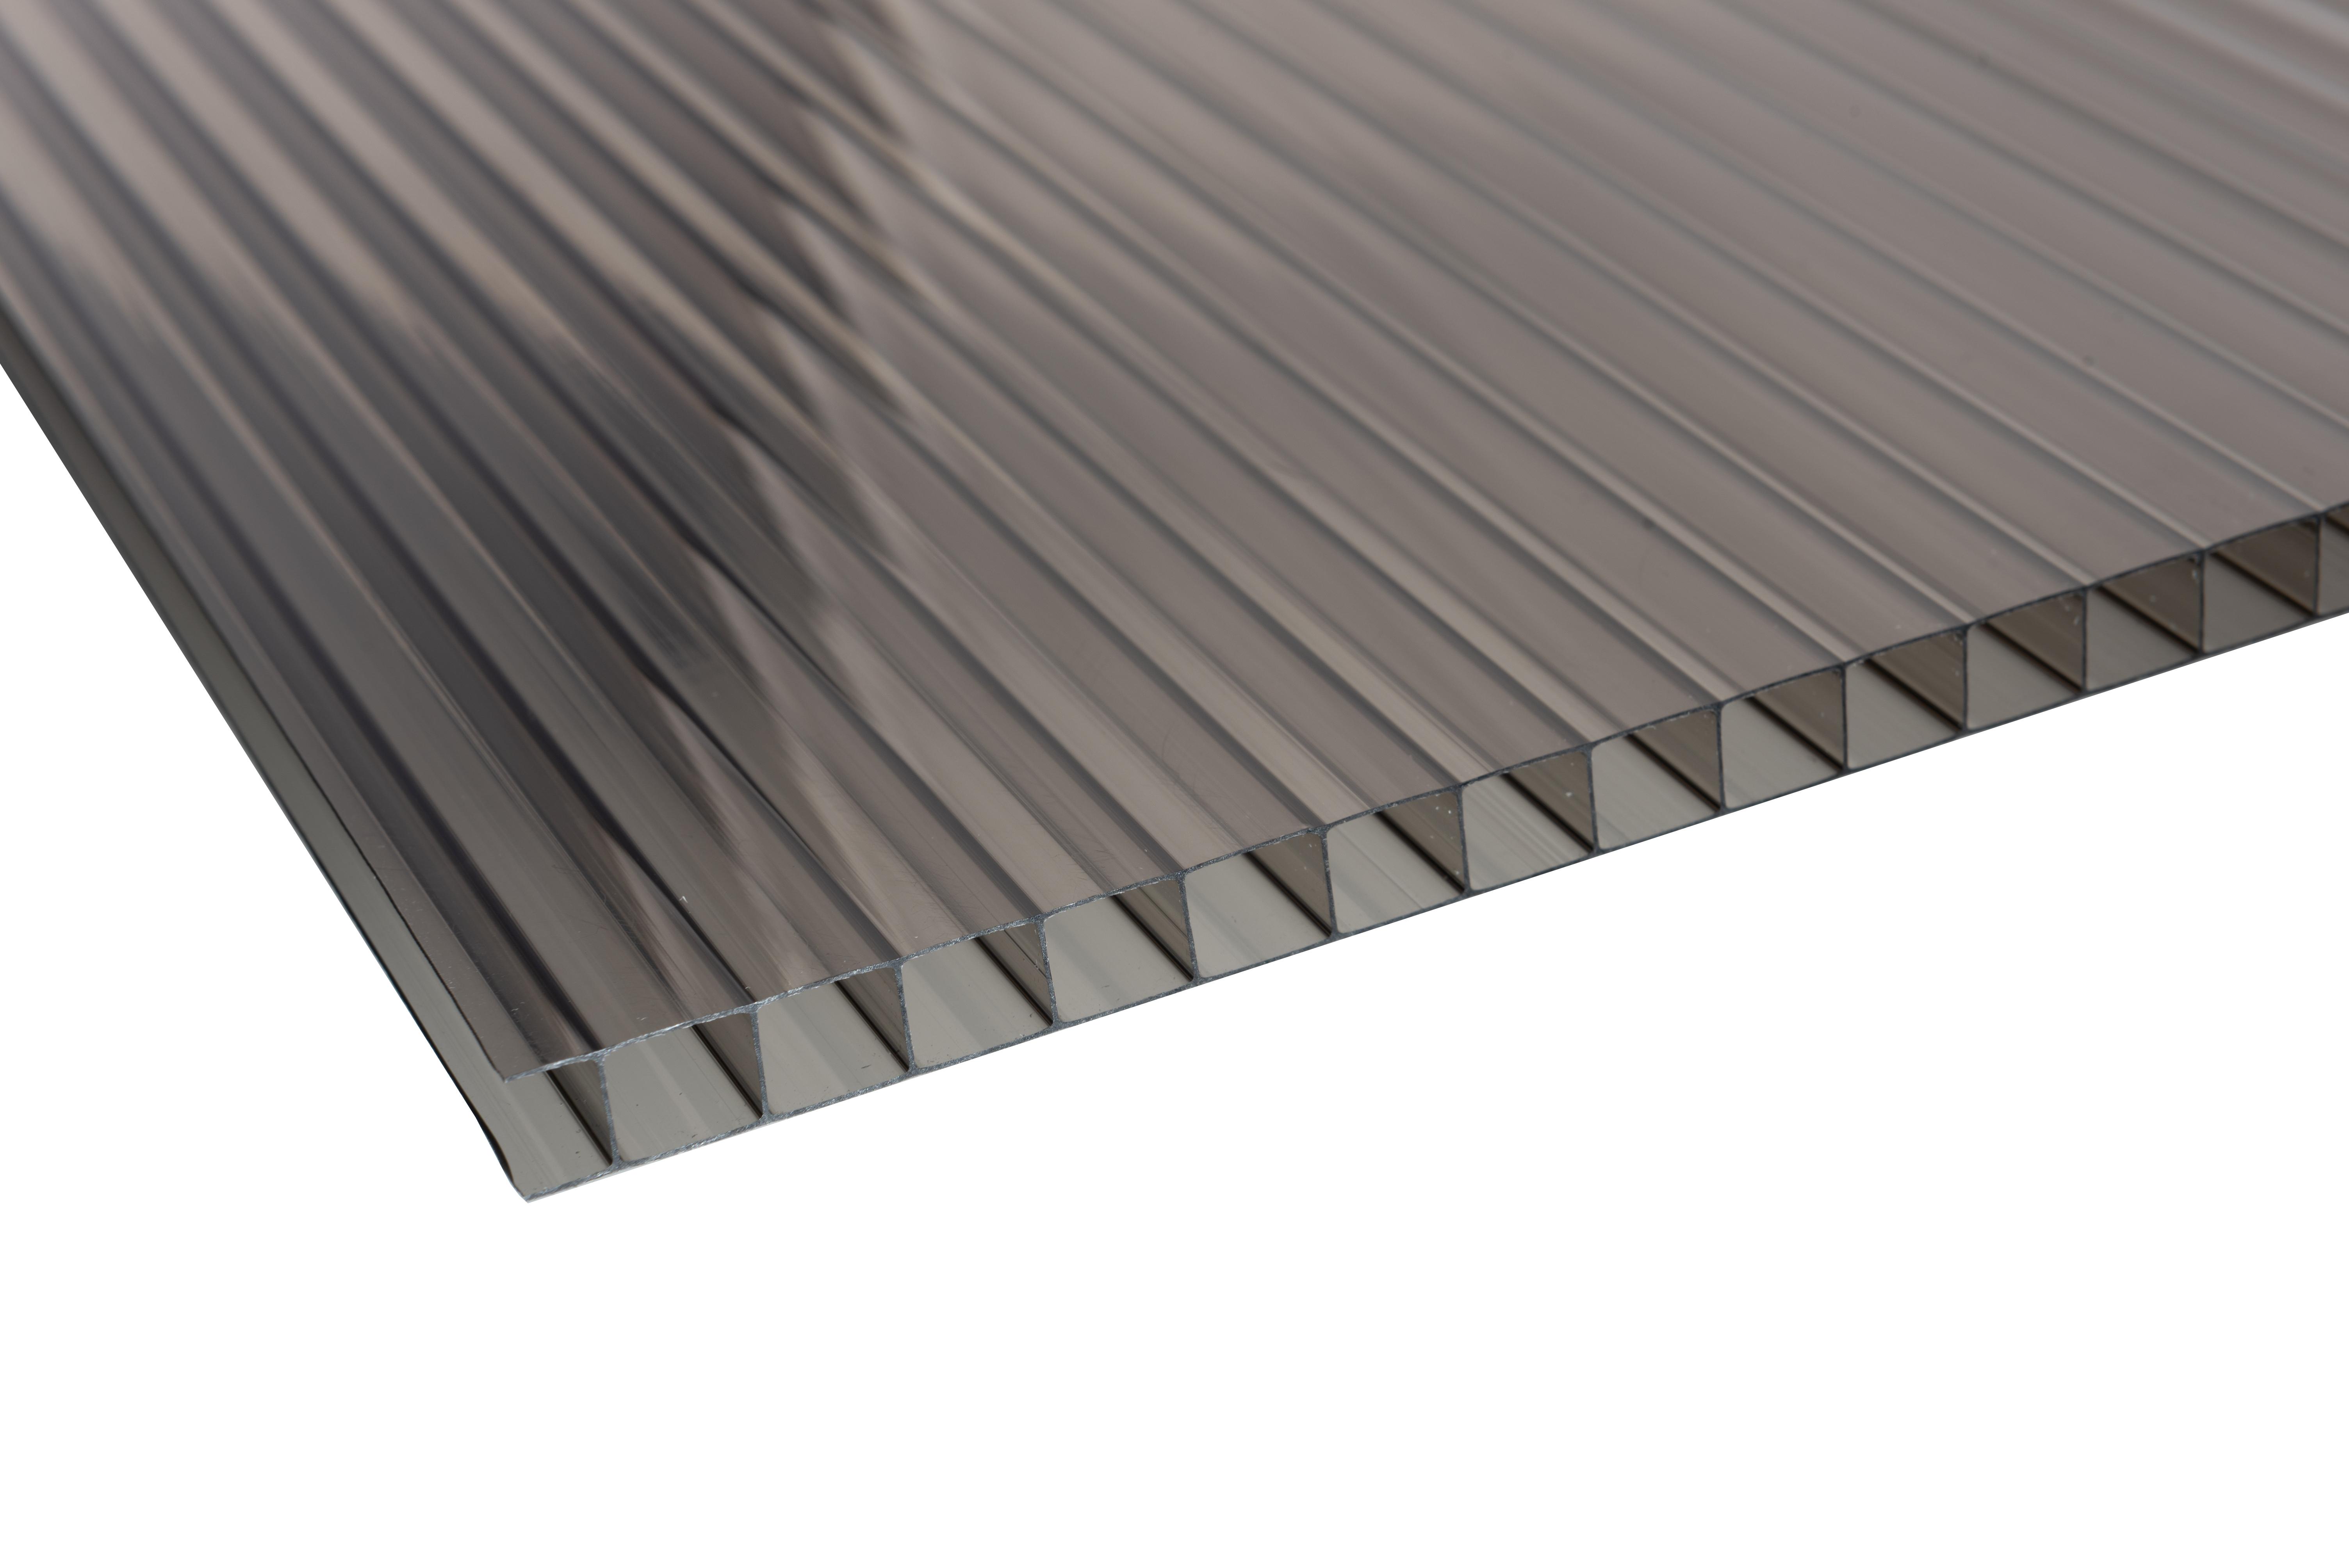 Image of 10mm Bronze Multiwall Polycarbonate Sheet - 4000 x 700mm